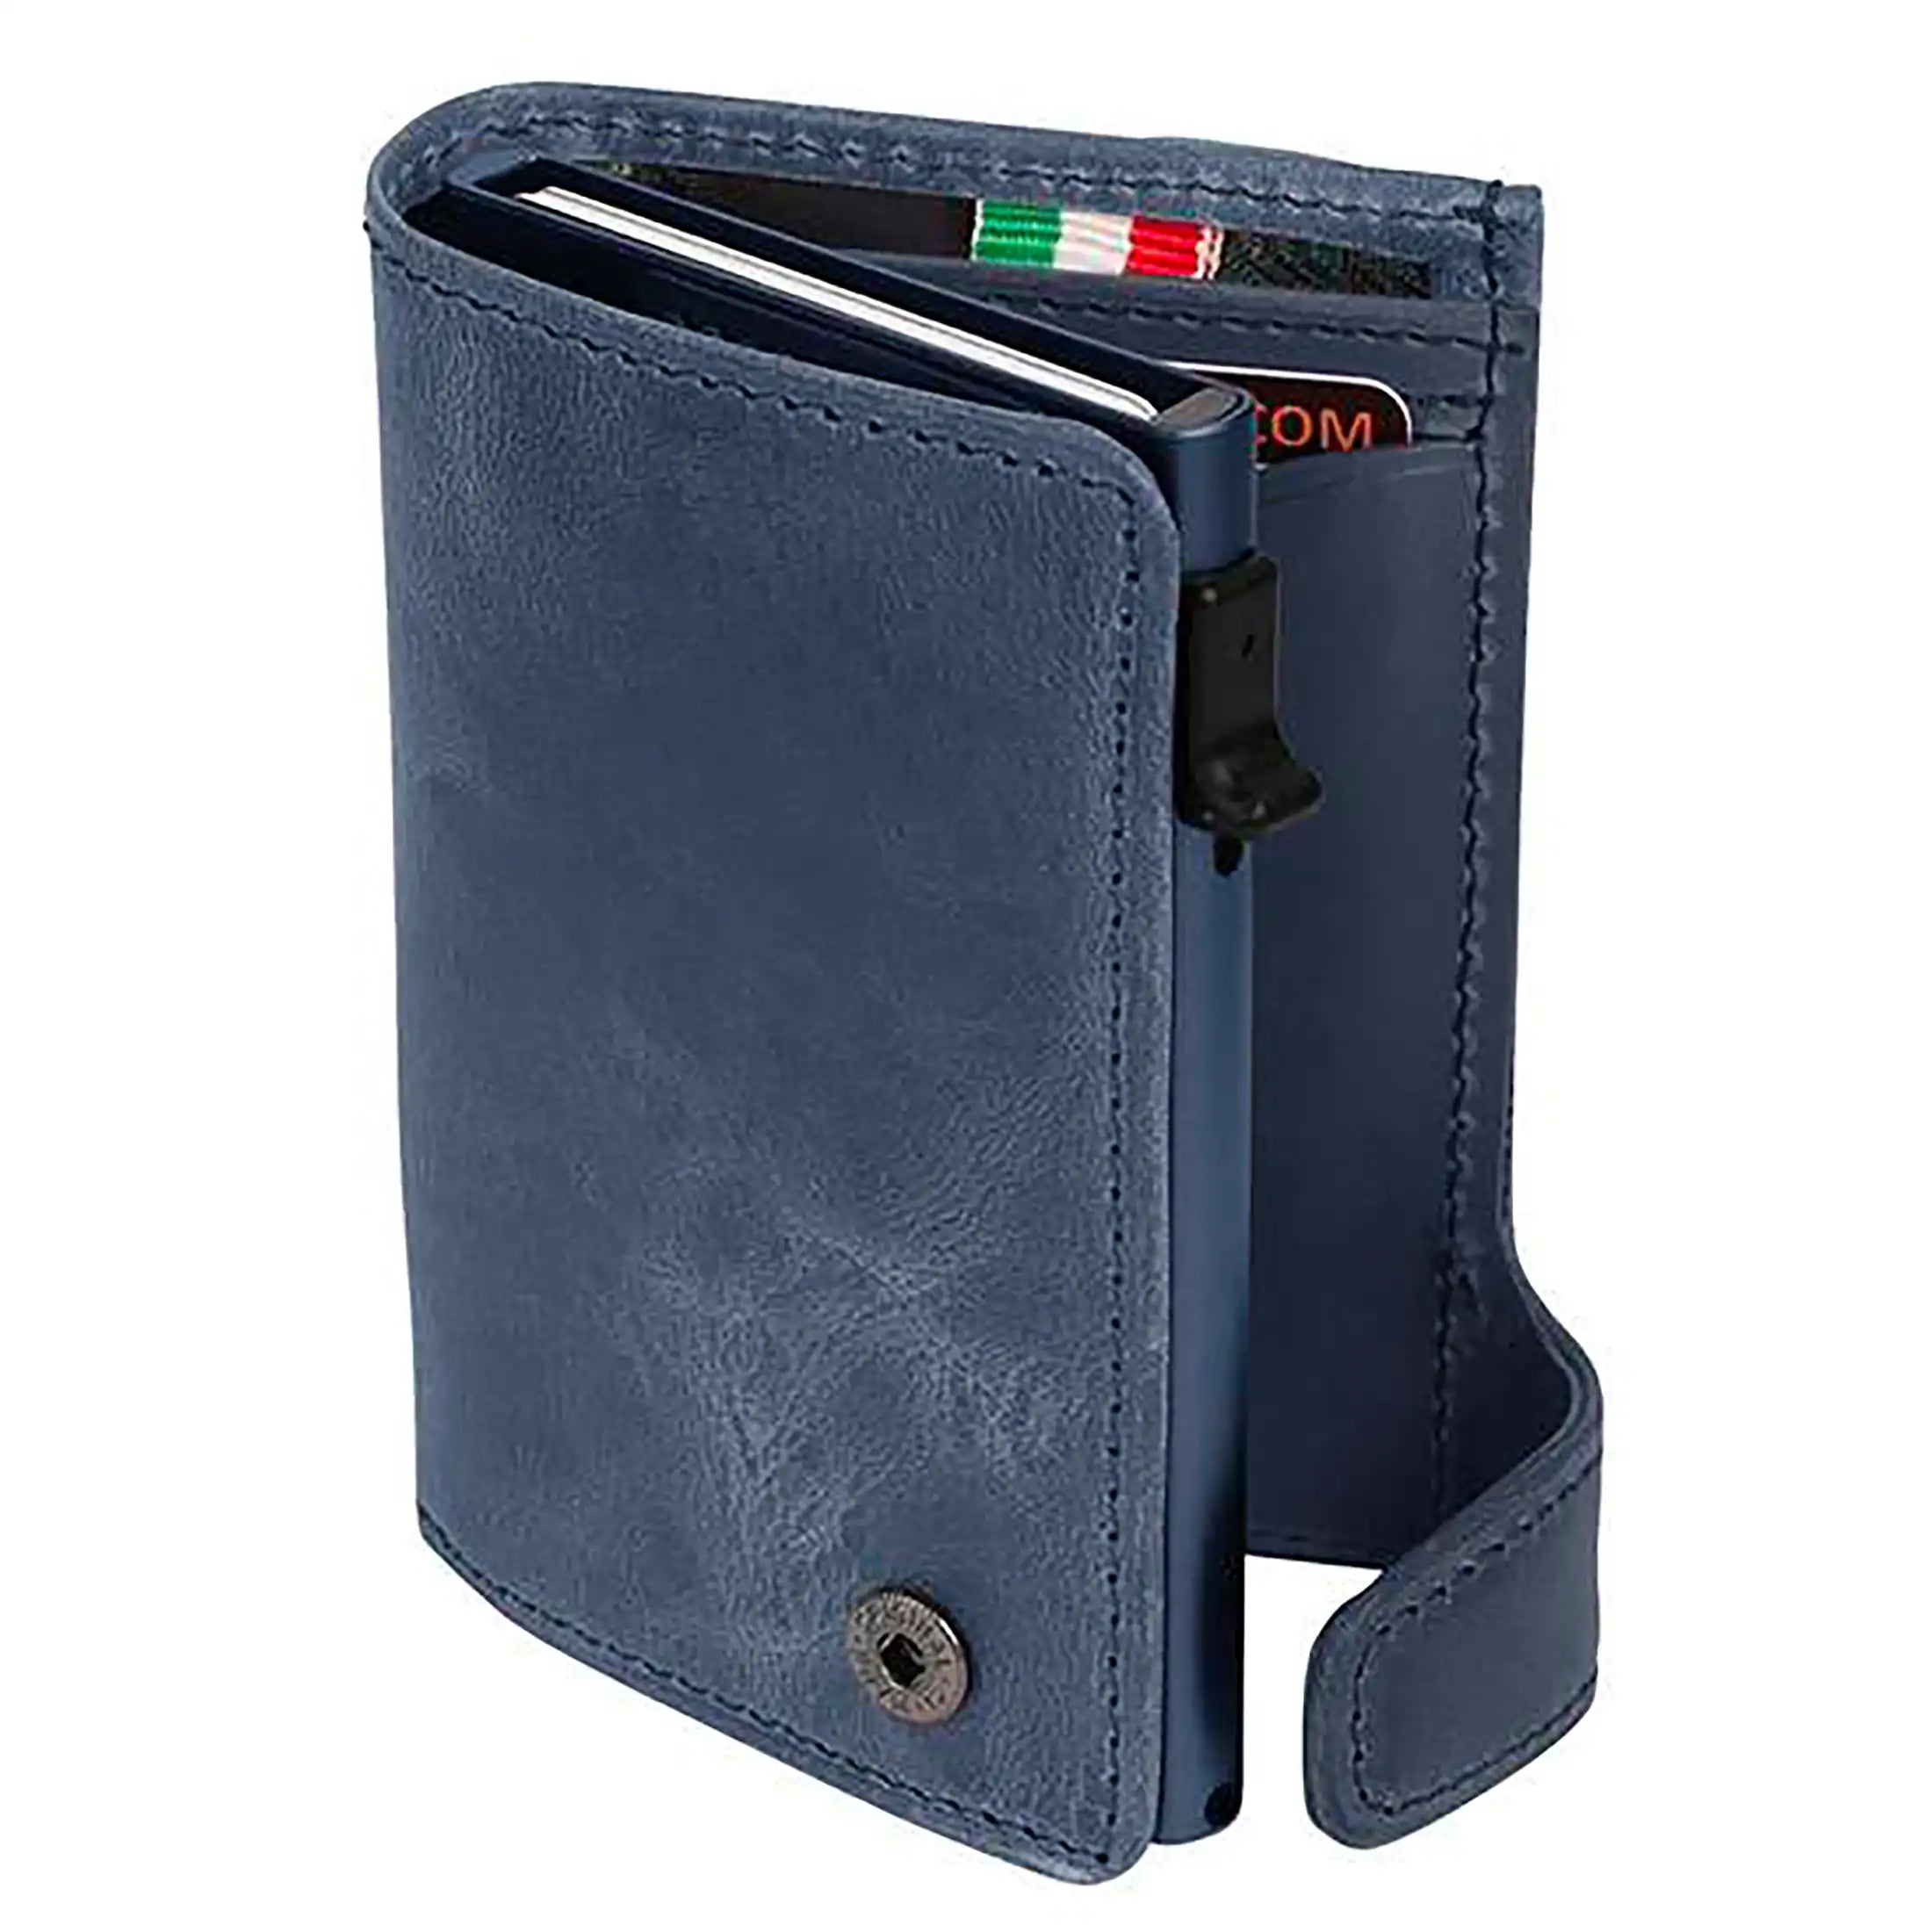 Tony Perotti Furbo Arno credit card holder with coin compartment 10 cm - Blue